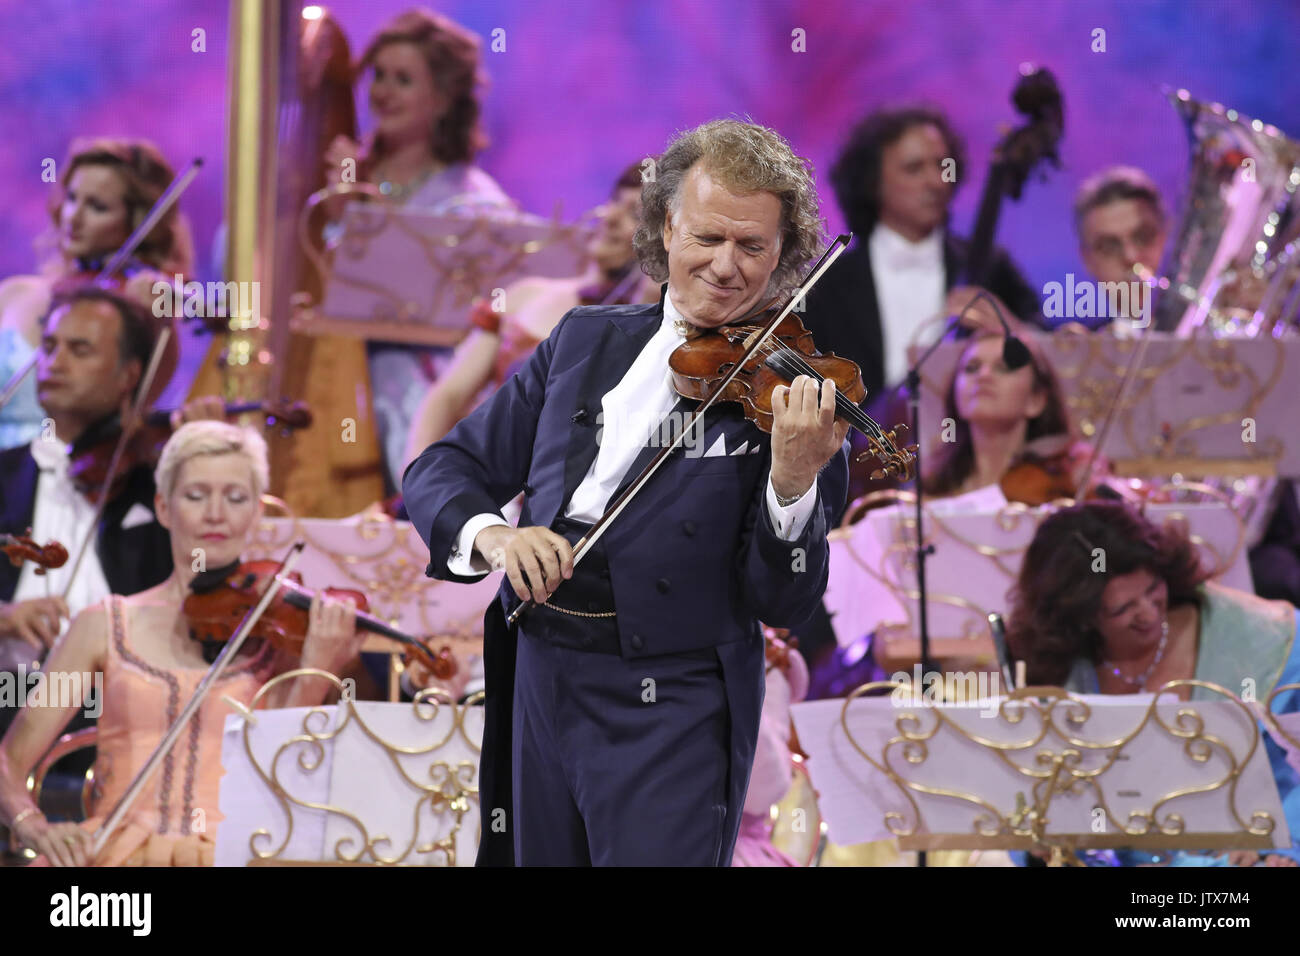 David Hasselhoff joins Andre Rieu on stage live from Vrifthof Square, in Maastricht, as part of his 30th Anniversary with the Johann Strauss Orchestra  Featuring: Andre Rieu Where: Maastricht, Netherlands When: 09 Jul 2017 Credit: WENN.com  **Only available for publication in UK, USA, Germany, Austria, Switzerland** Stock Photo